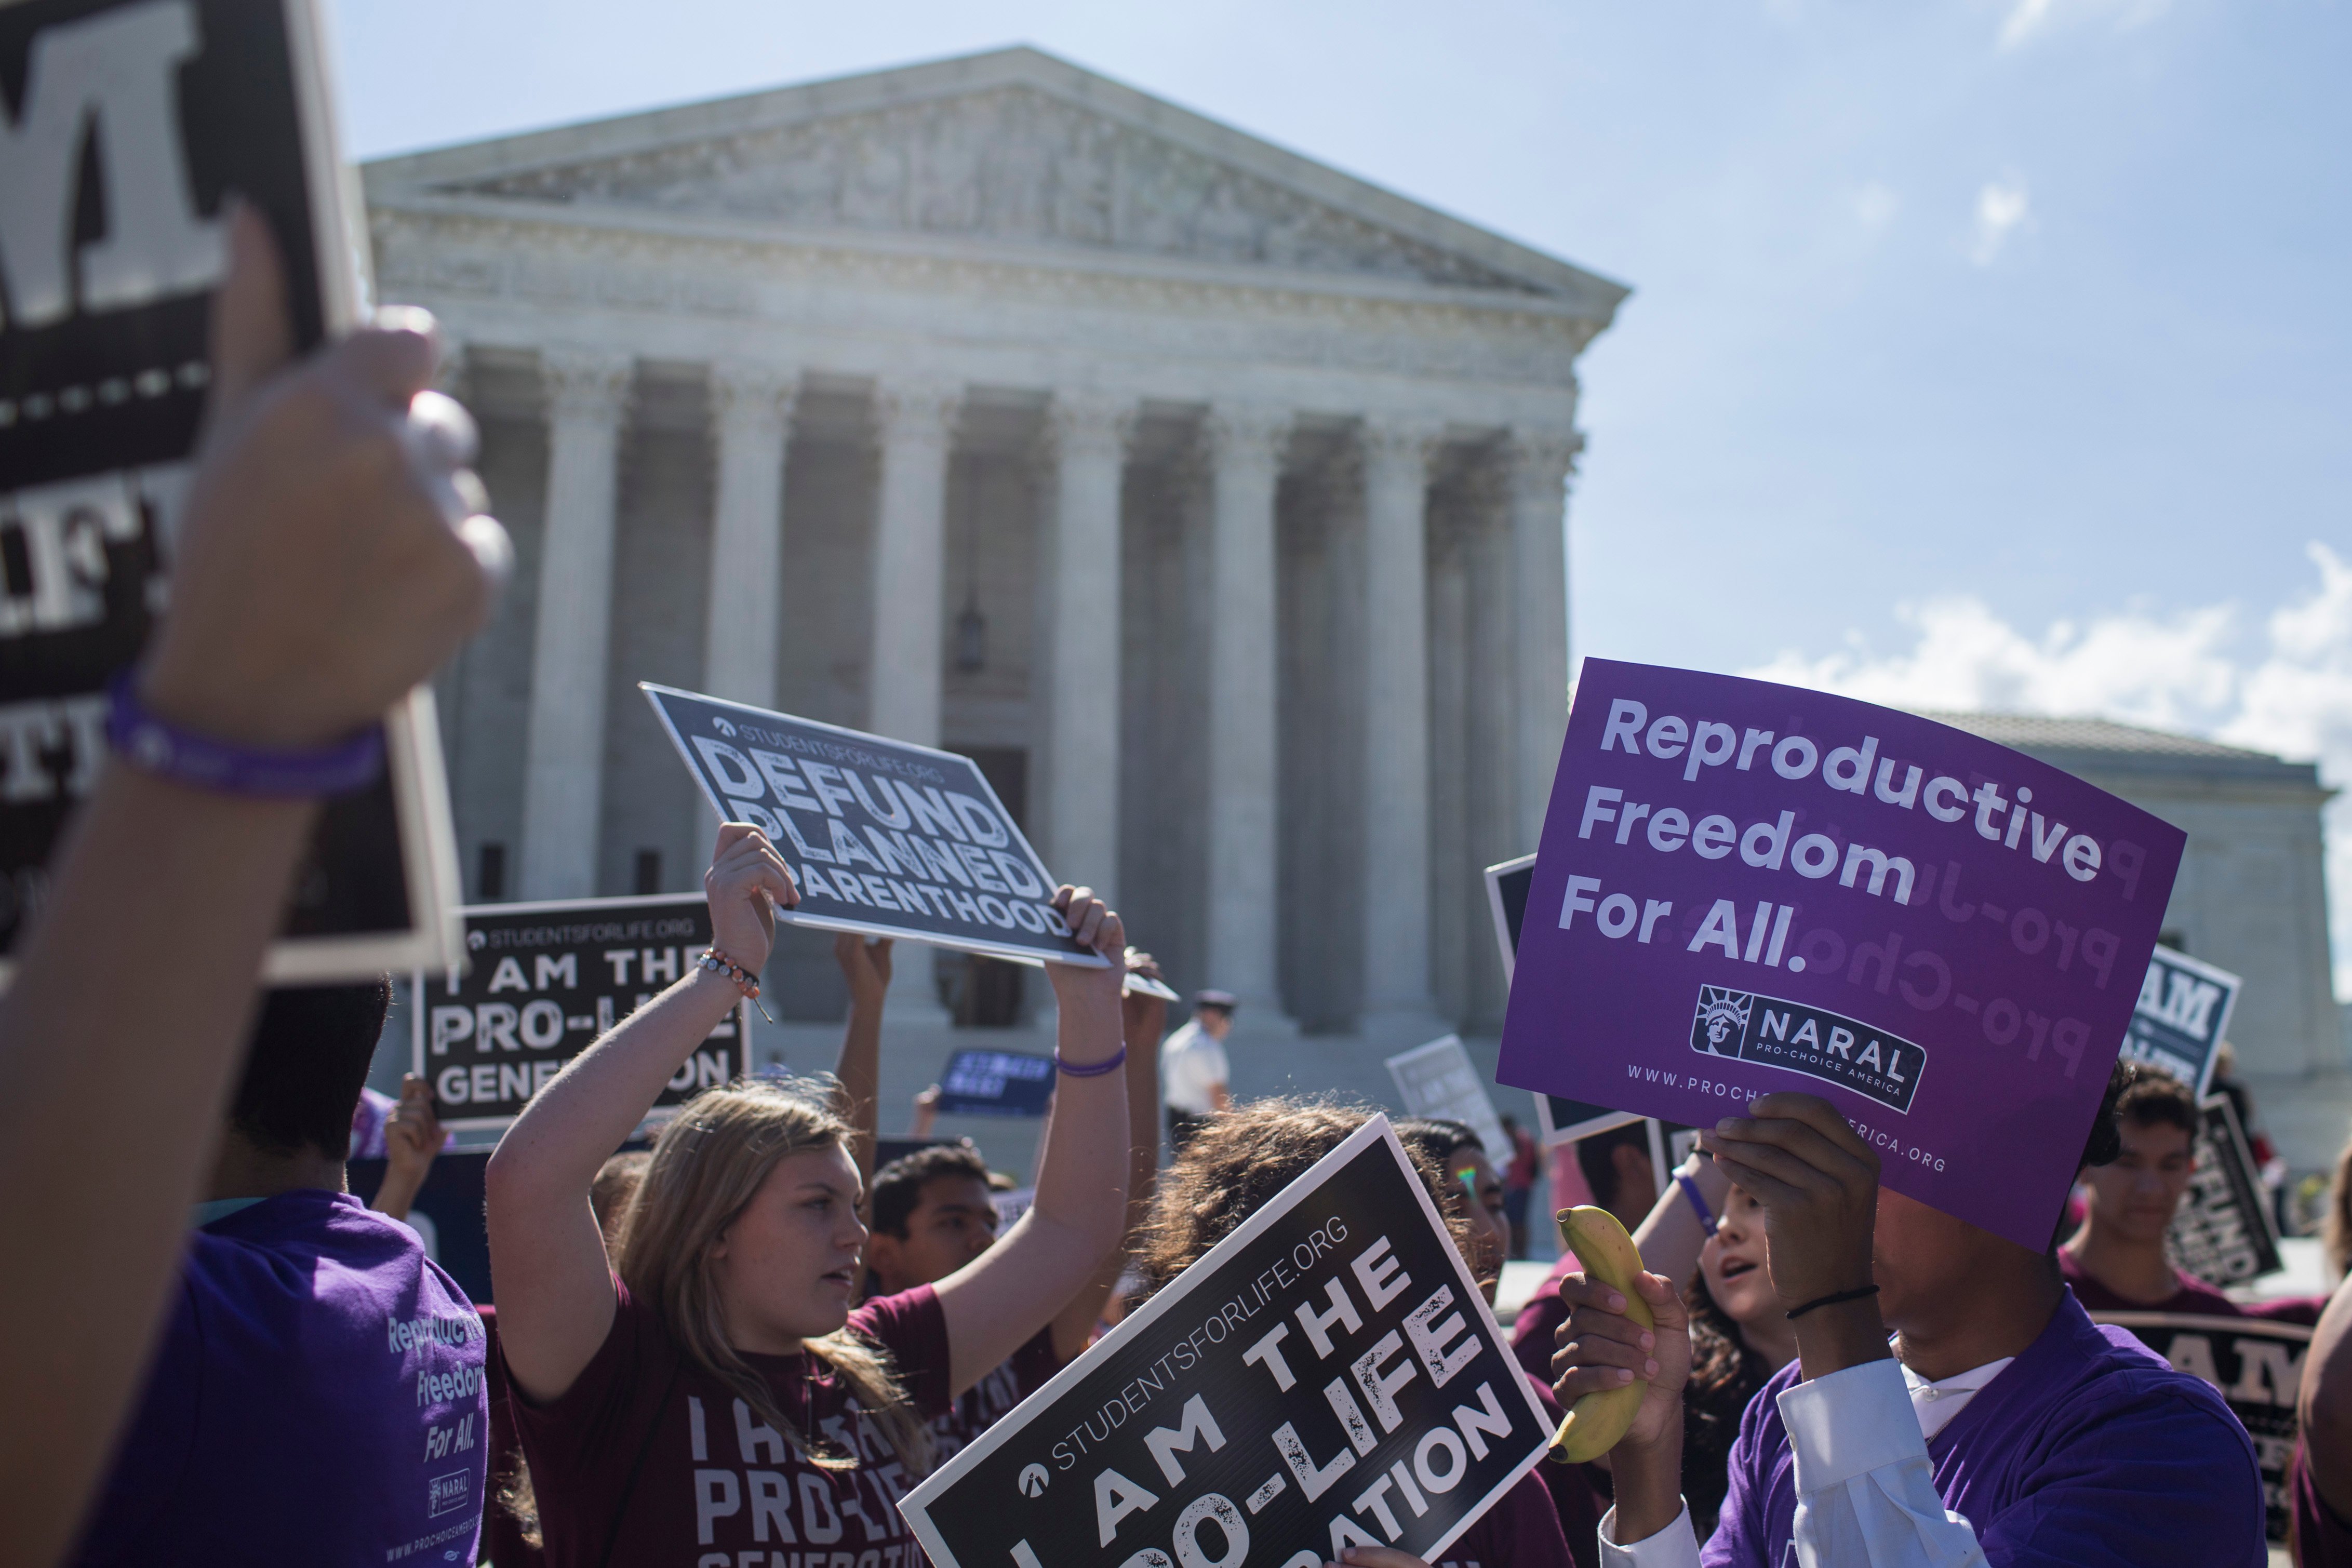 Abortion opponents and supporters demonstrate in front of the Supreme Court on June 25, 2018. (Zach Gibson/Getty Images)